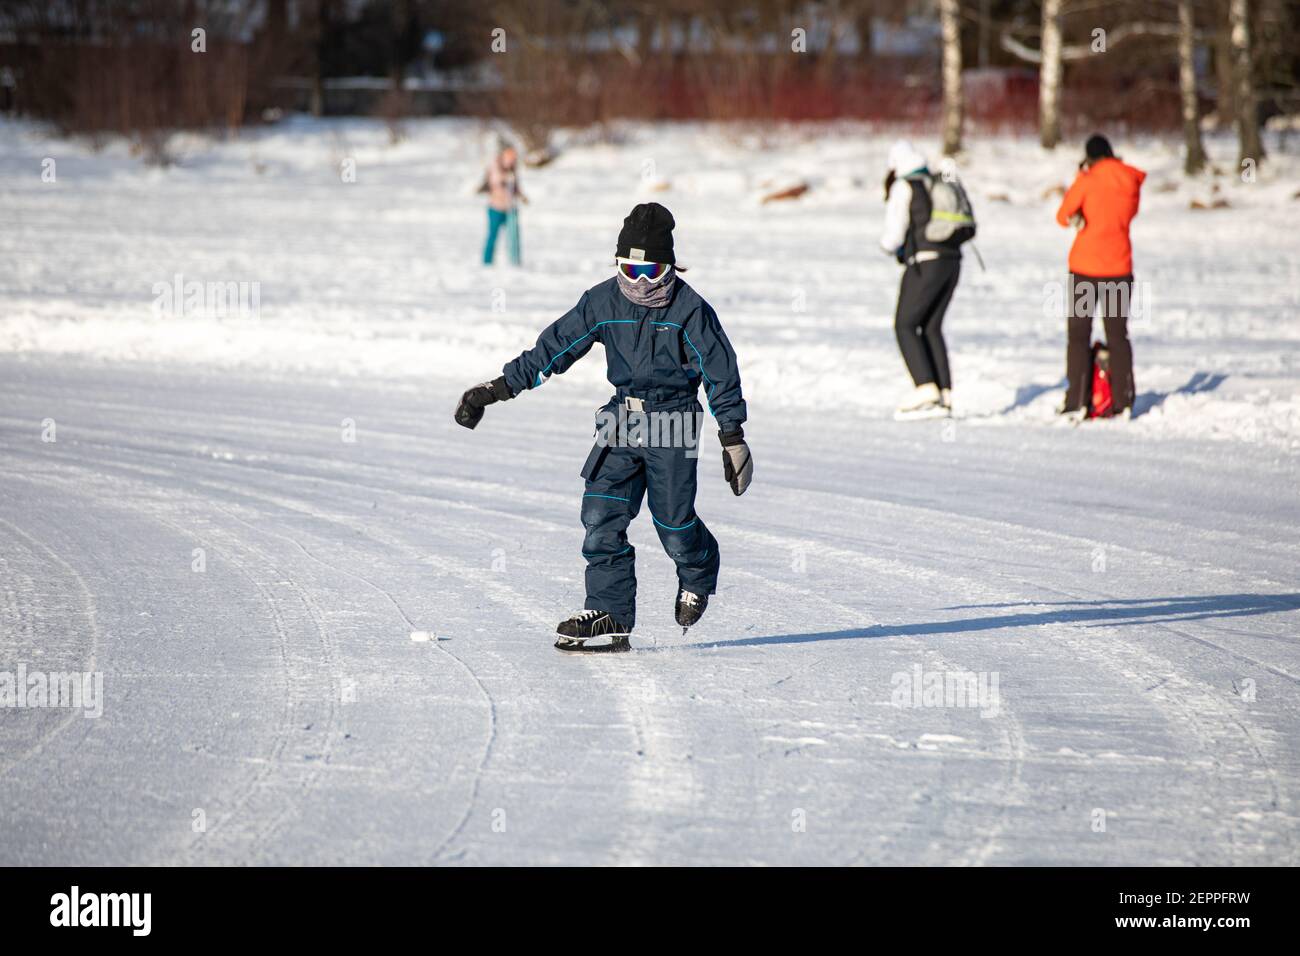 Young person skating on natural ice of frozen Laajalahti Bay in Munkkiniemi district of Helsinki, Finland Stock Photo